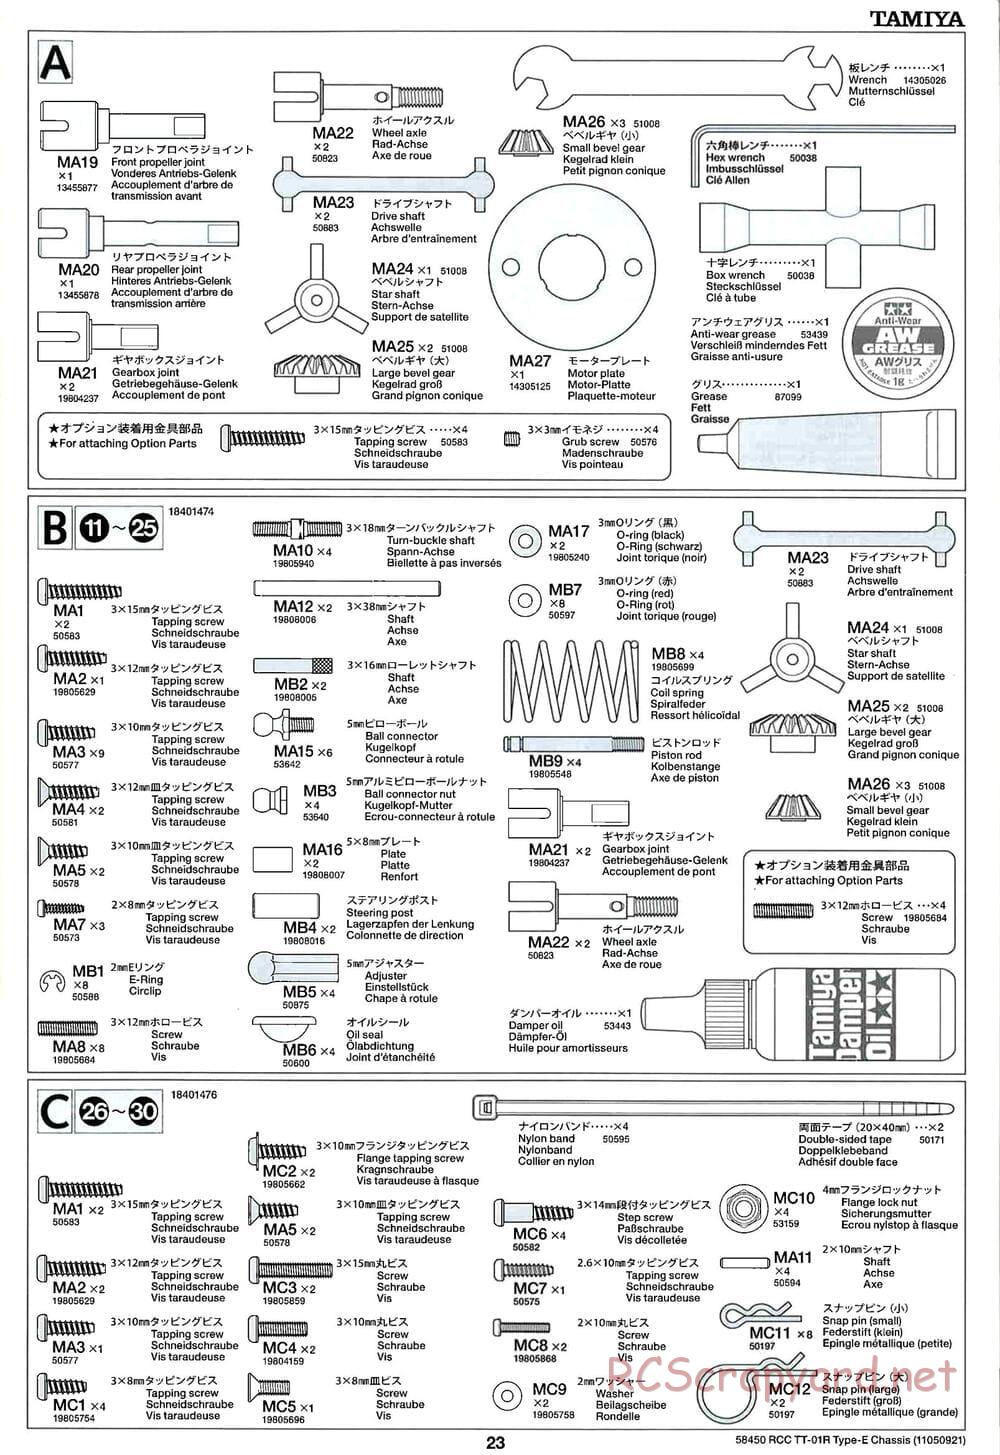 Tamiya - TT-01R Type-E Chassis - Manual - Page 23